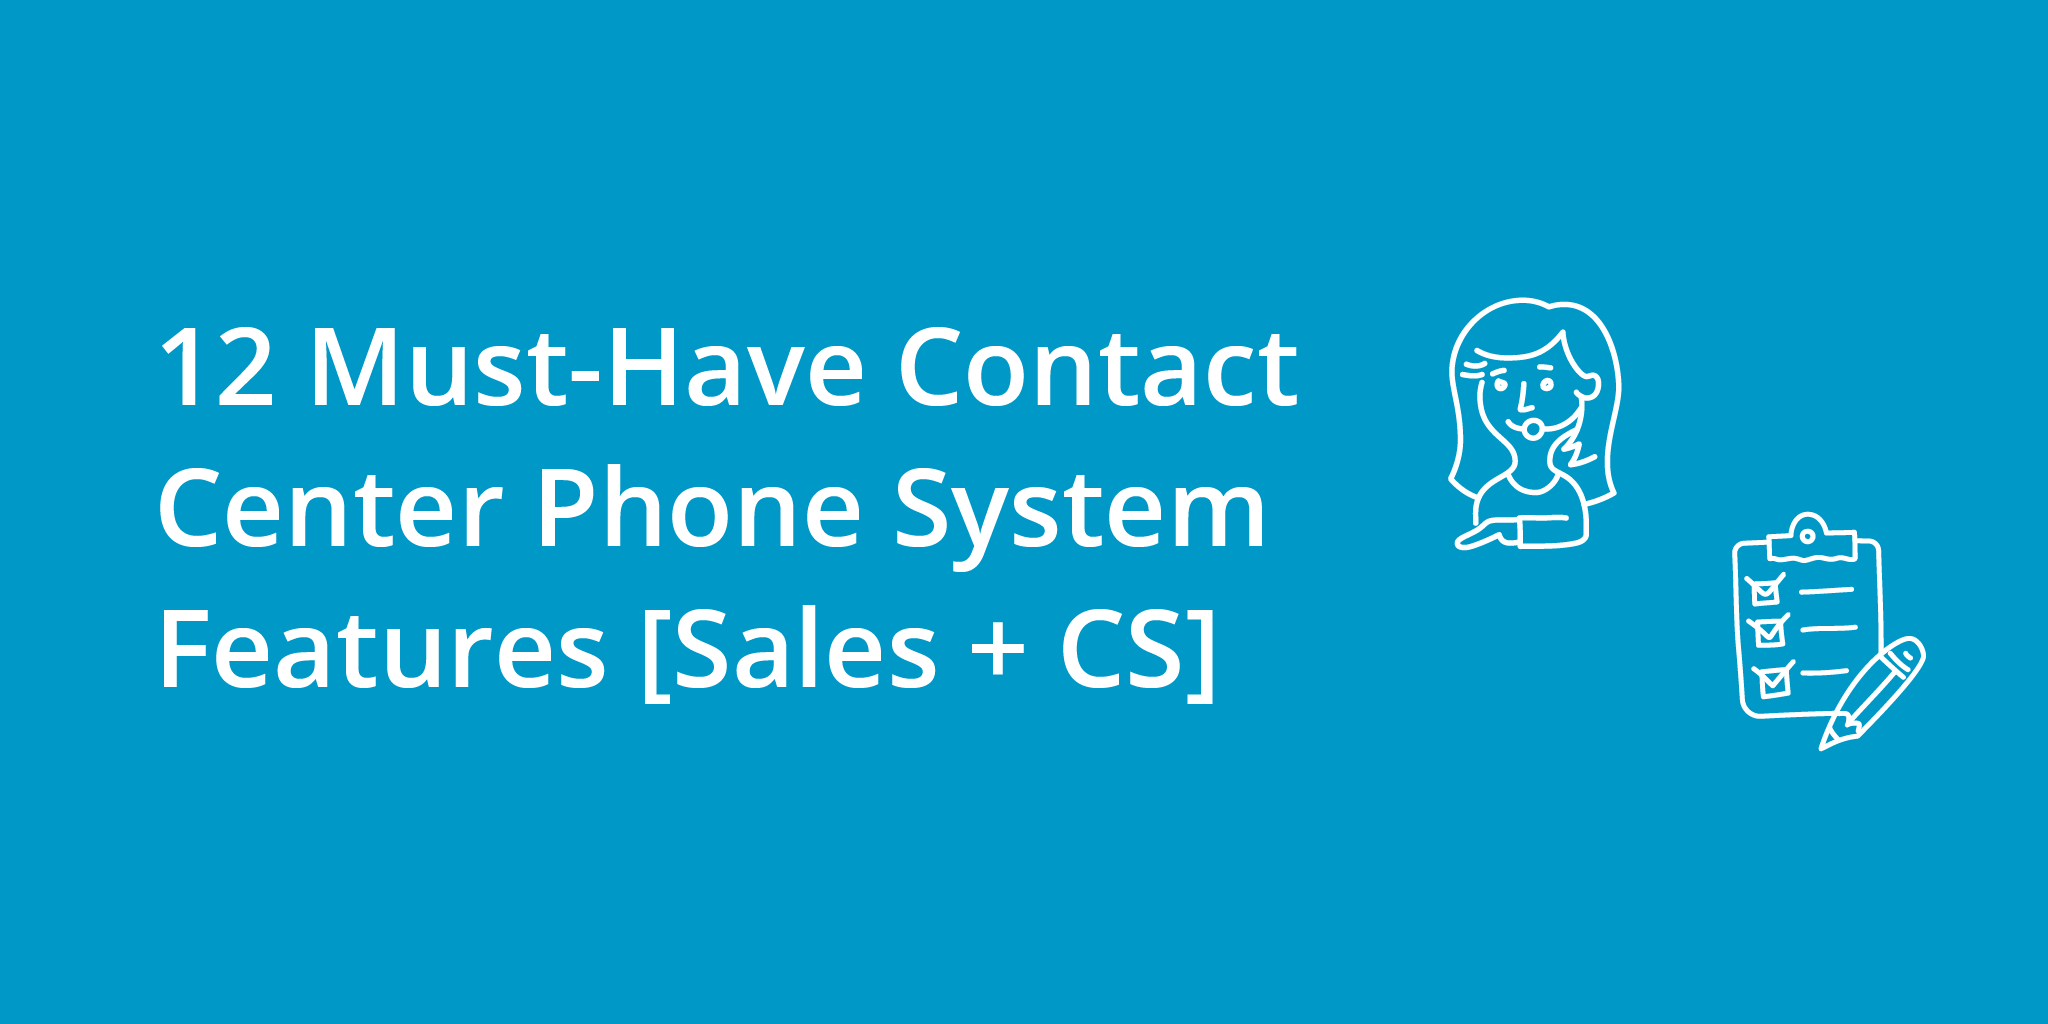 12 Must-Have Contact Center Phone System Features